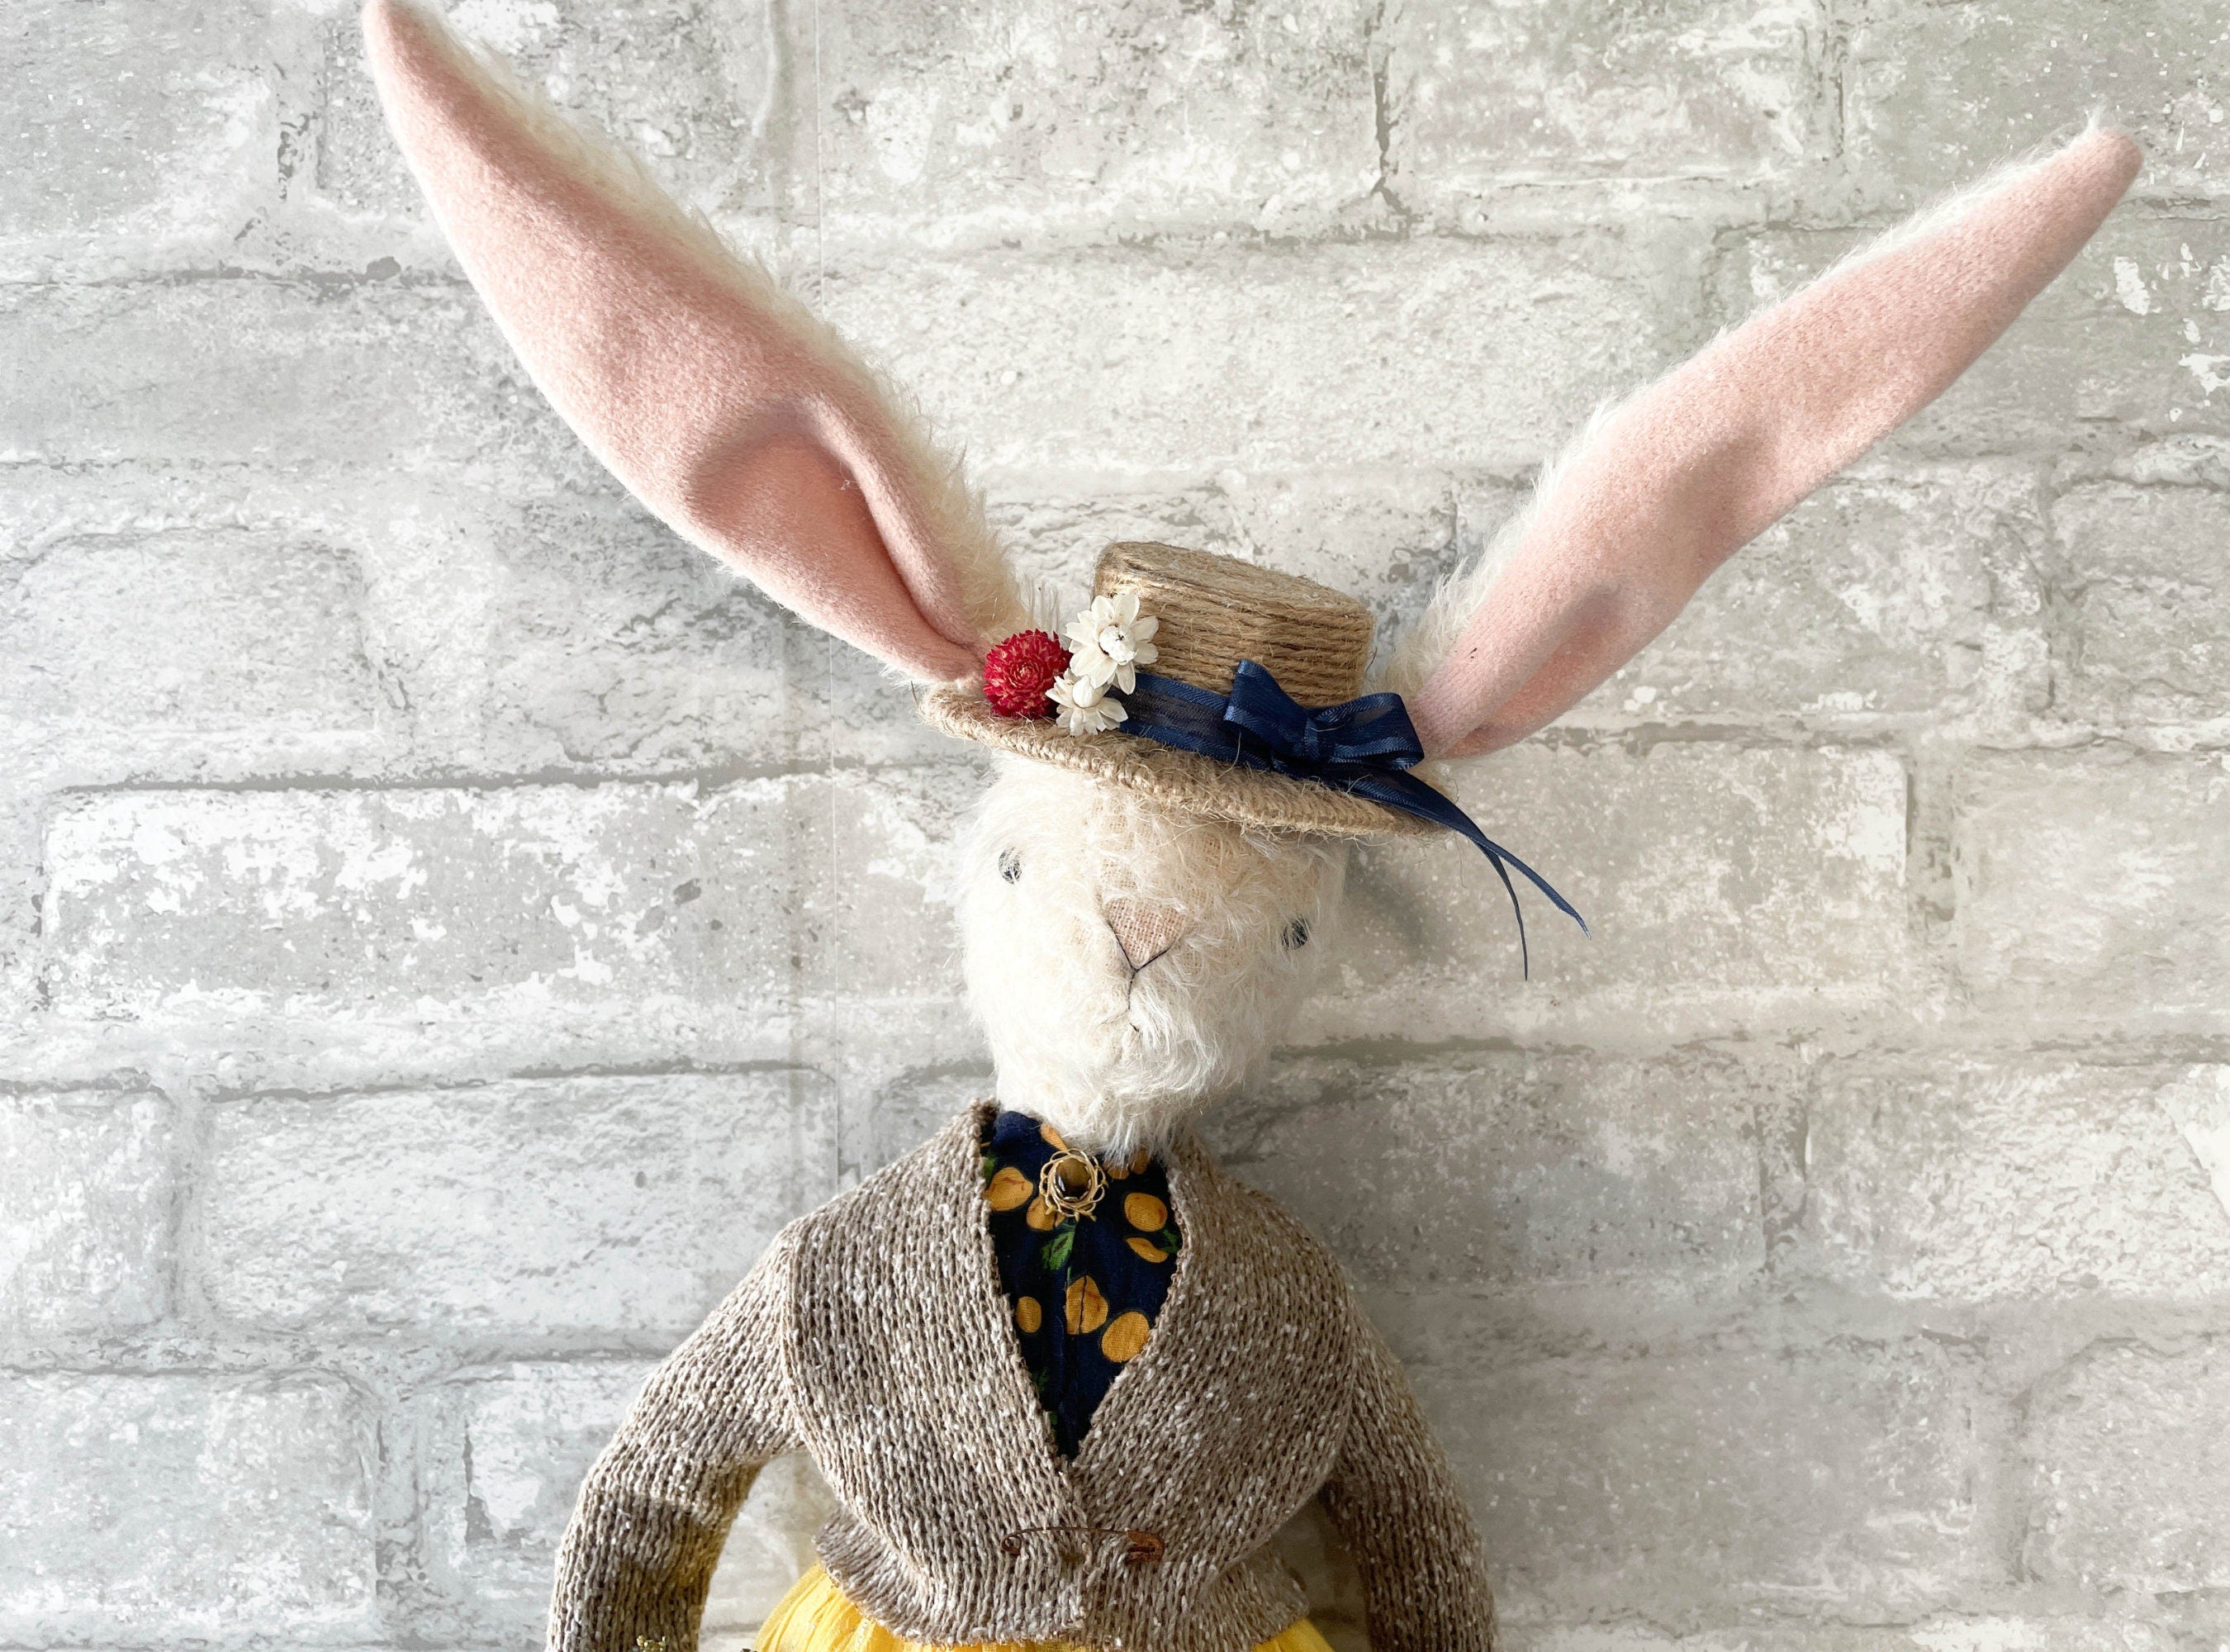 One of a Kind Handmade Bunny Doll / Audrey Handmade Cloth Doll / Spring and Easter Bunny Decoration